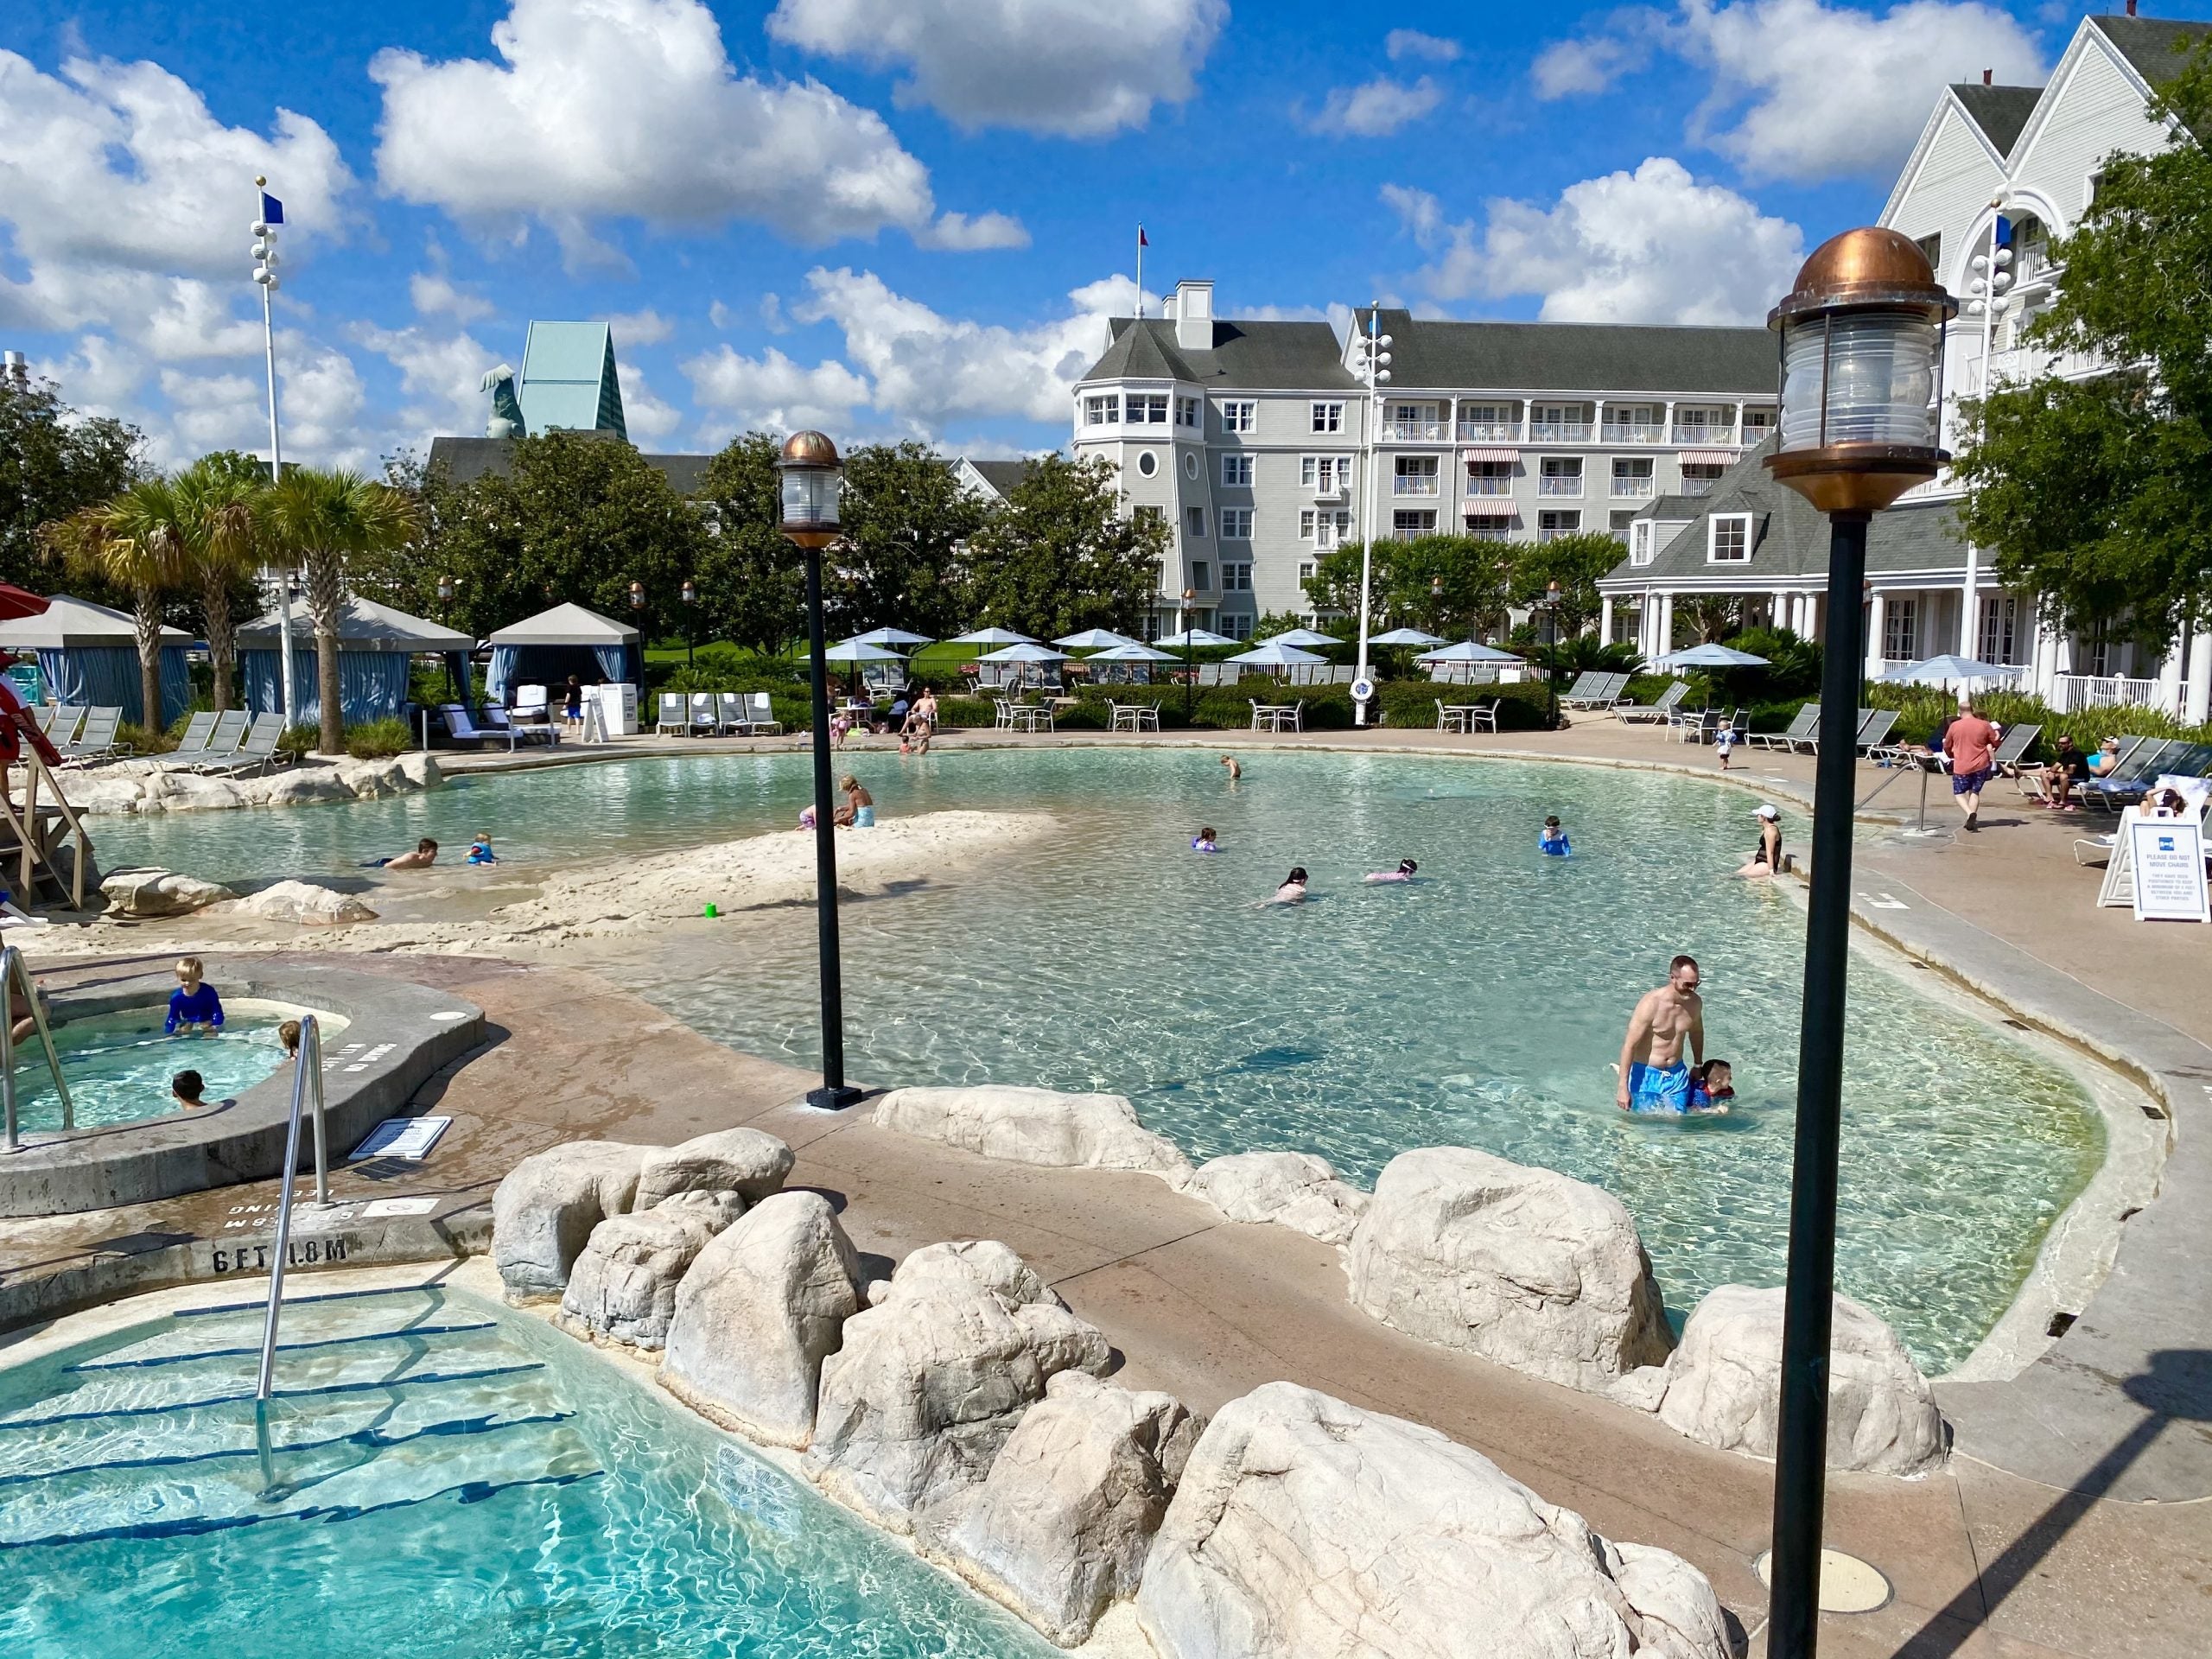 Hotel review: Disney's Yacht Club Resort - The Points Guy - The Points Guy